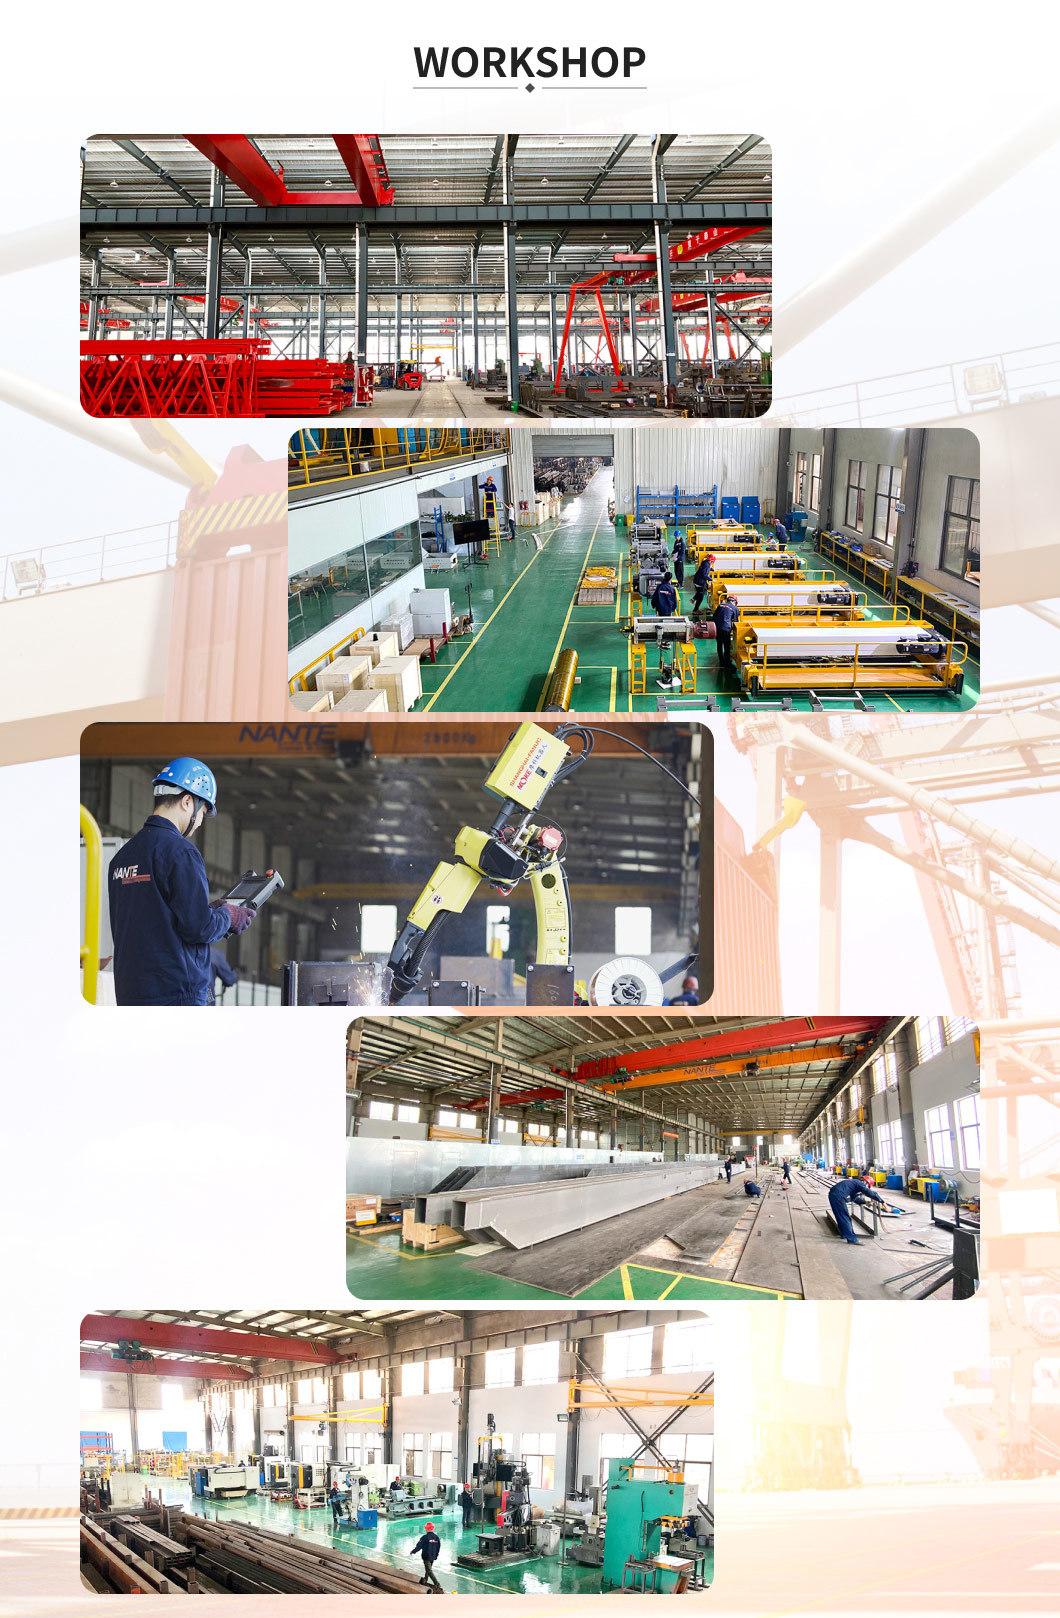 High Stability 15-40t Double Girder Overhead Crane with Great Materials